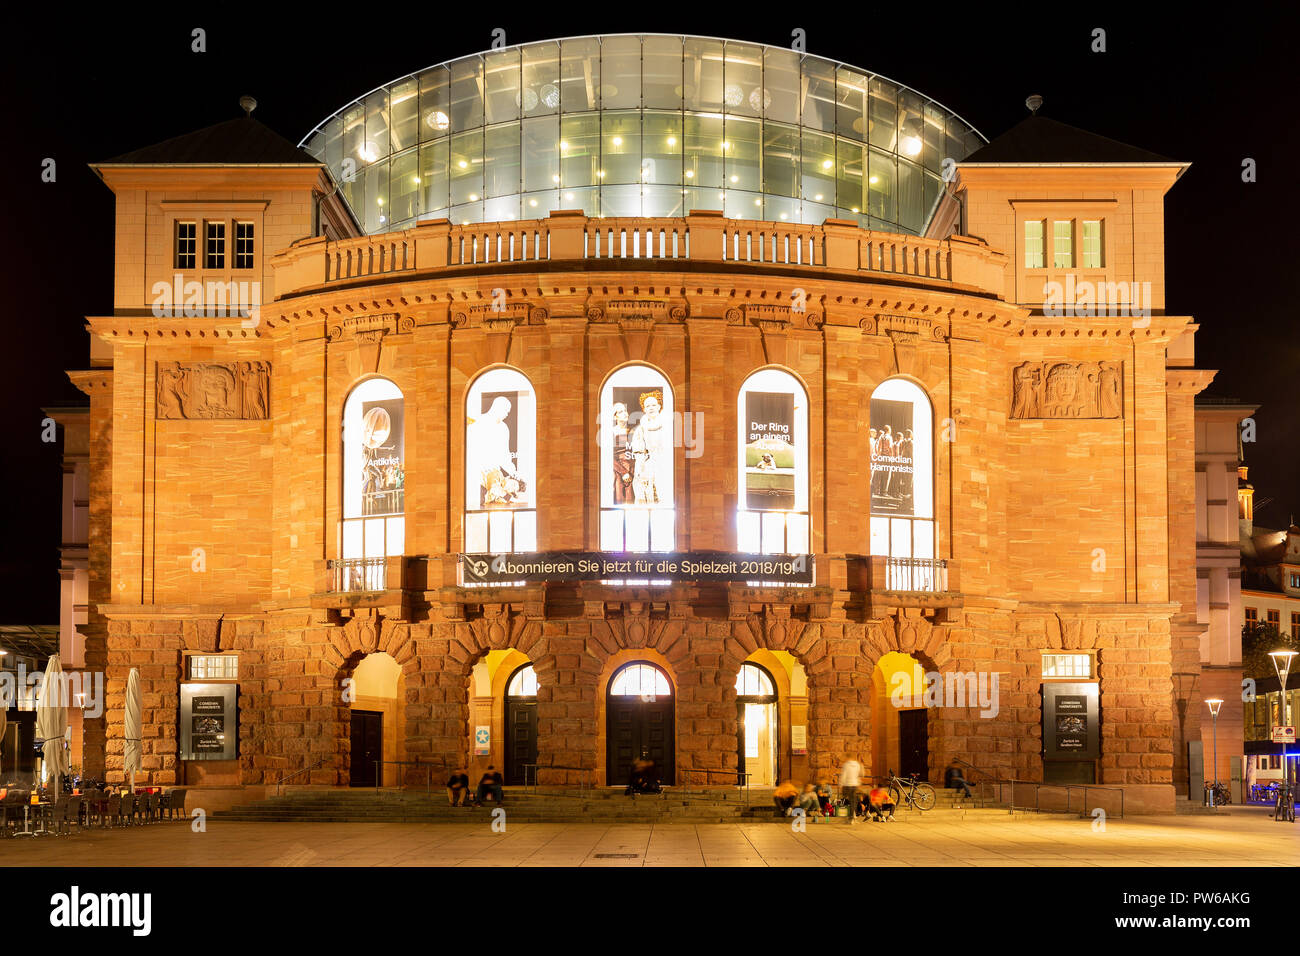 Mainz, Germany, Gutenbergplatz, October 12th. 2018 - Staatstheater Mainz at night. The theatre was build between 1829 and 1833 by the architect Georg  Stock Photo